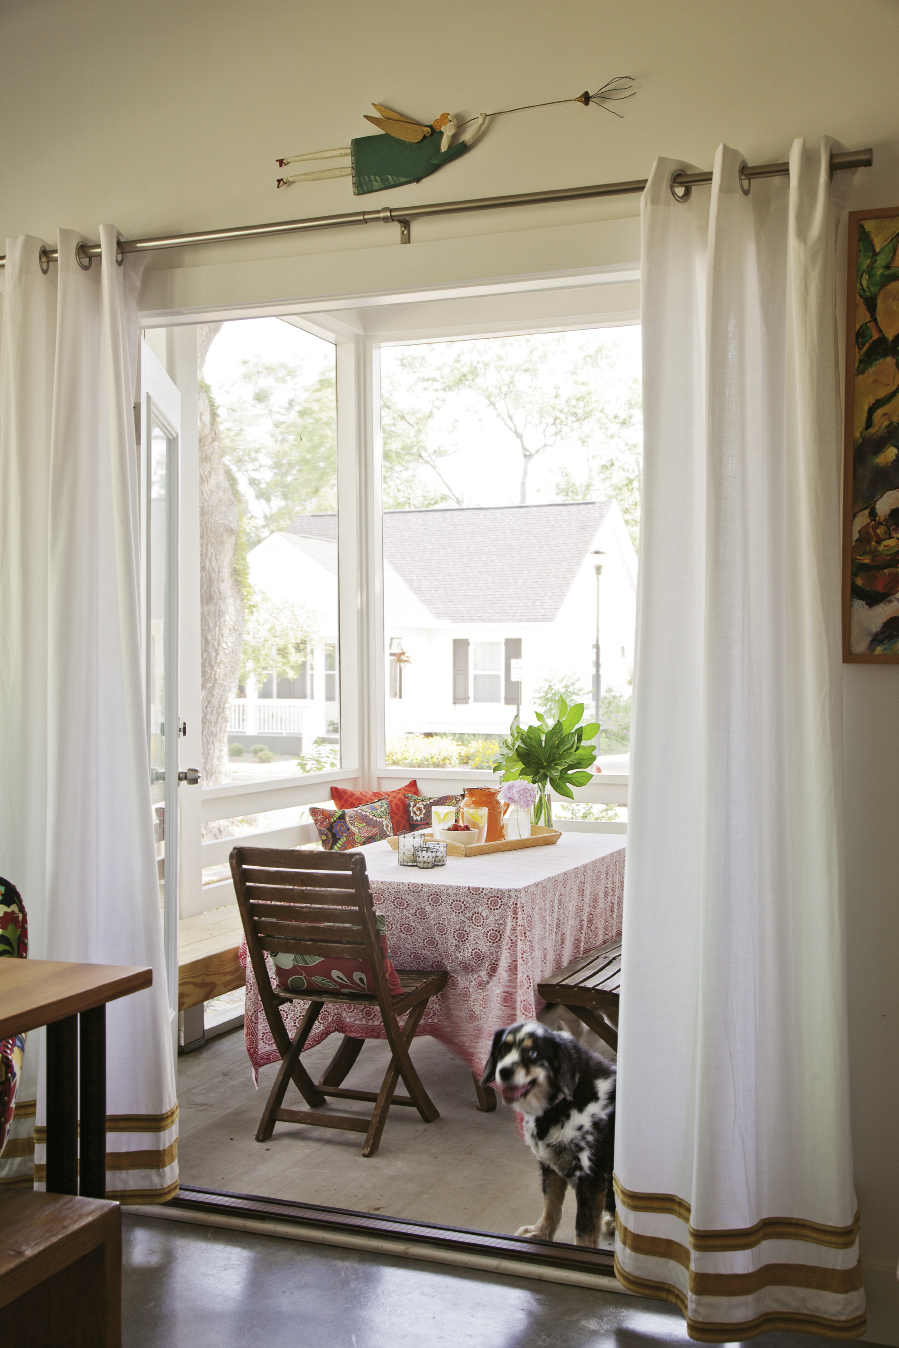 Textiles—some new, others collected over time—brighten the screened-in porch.